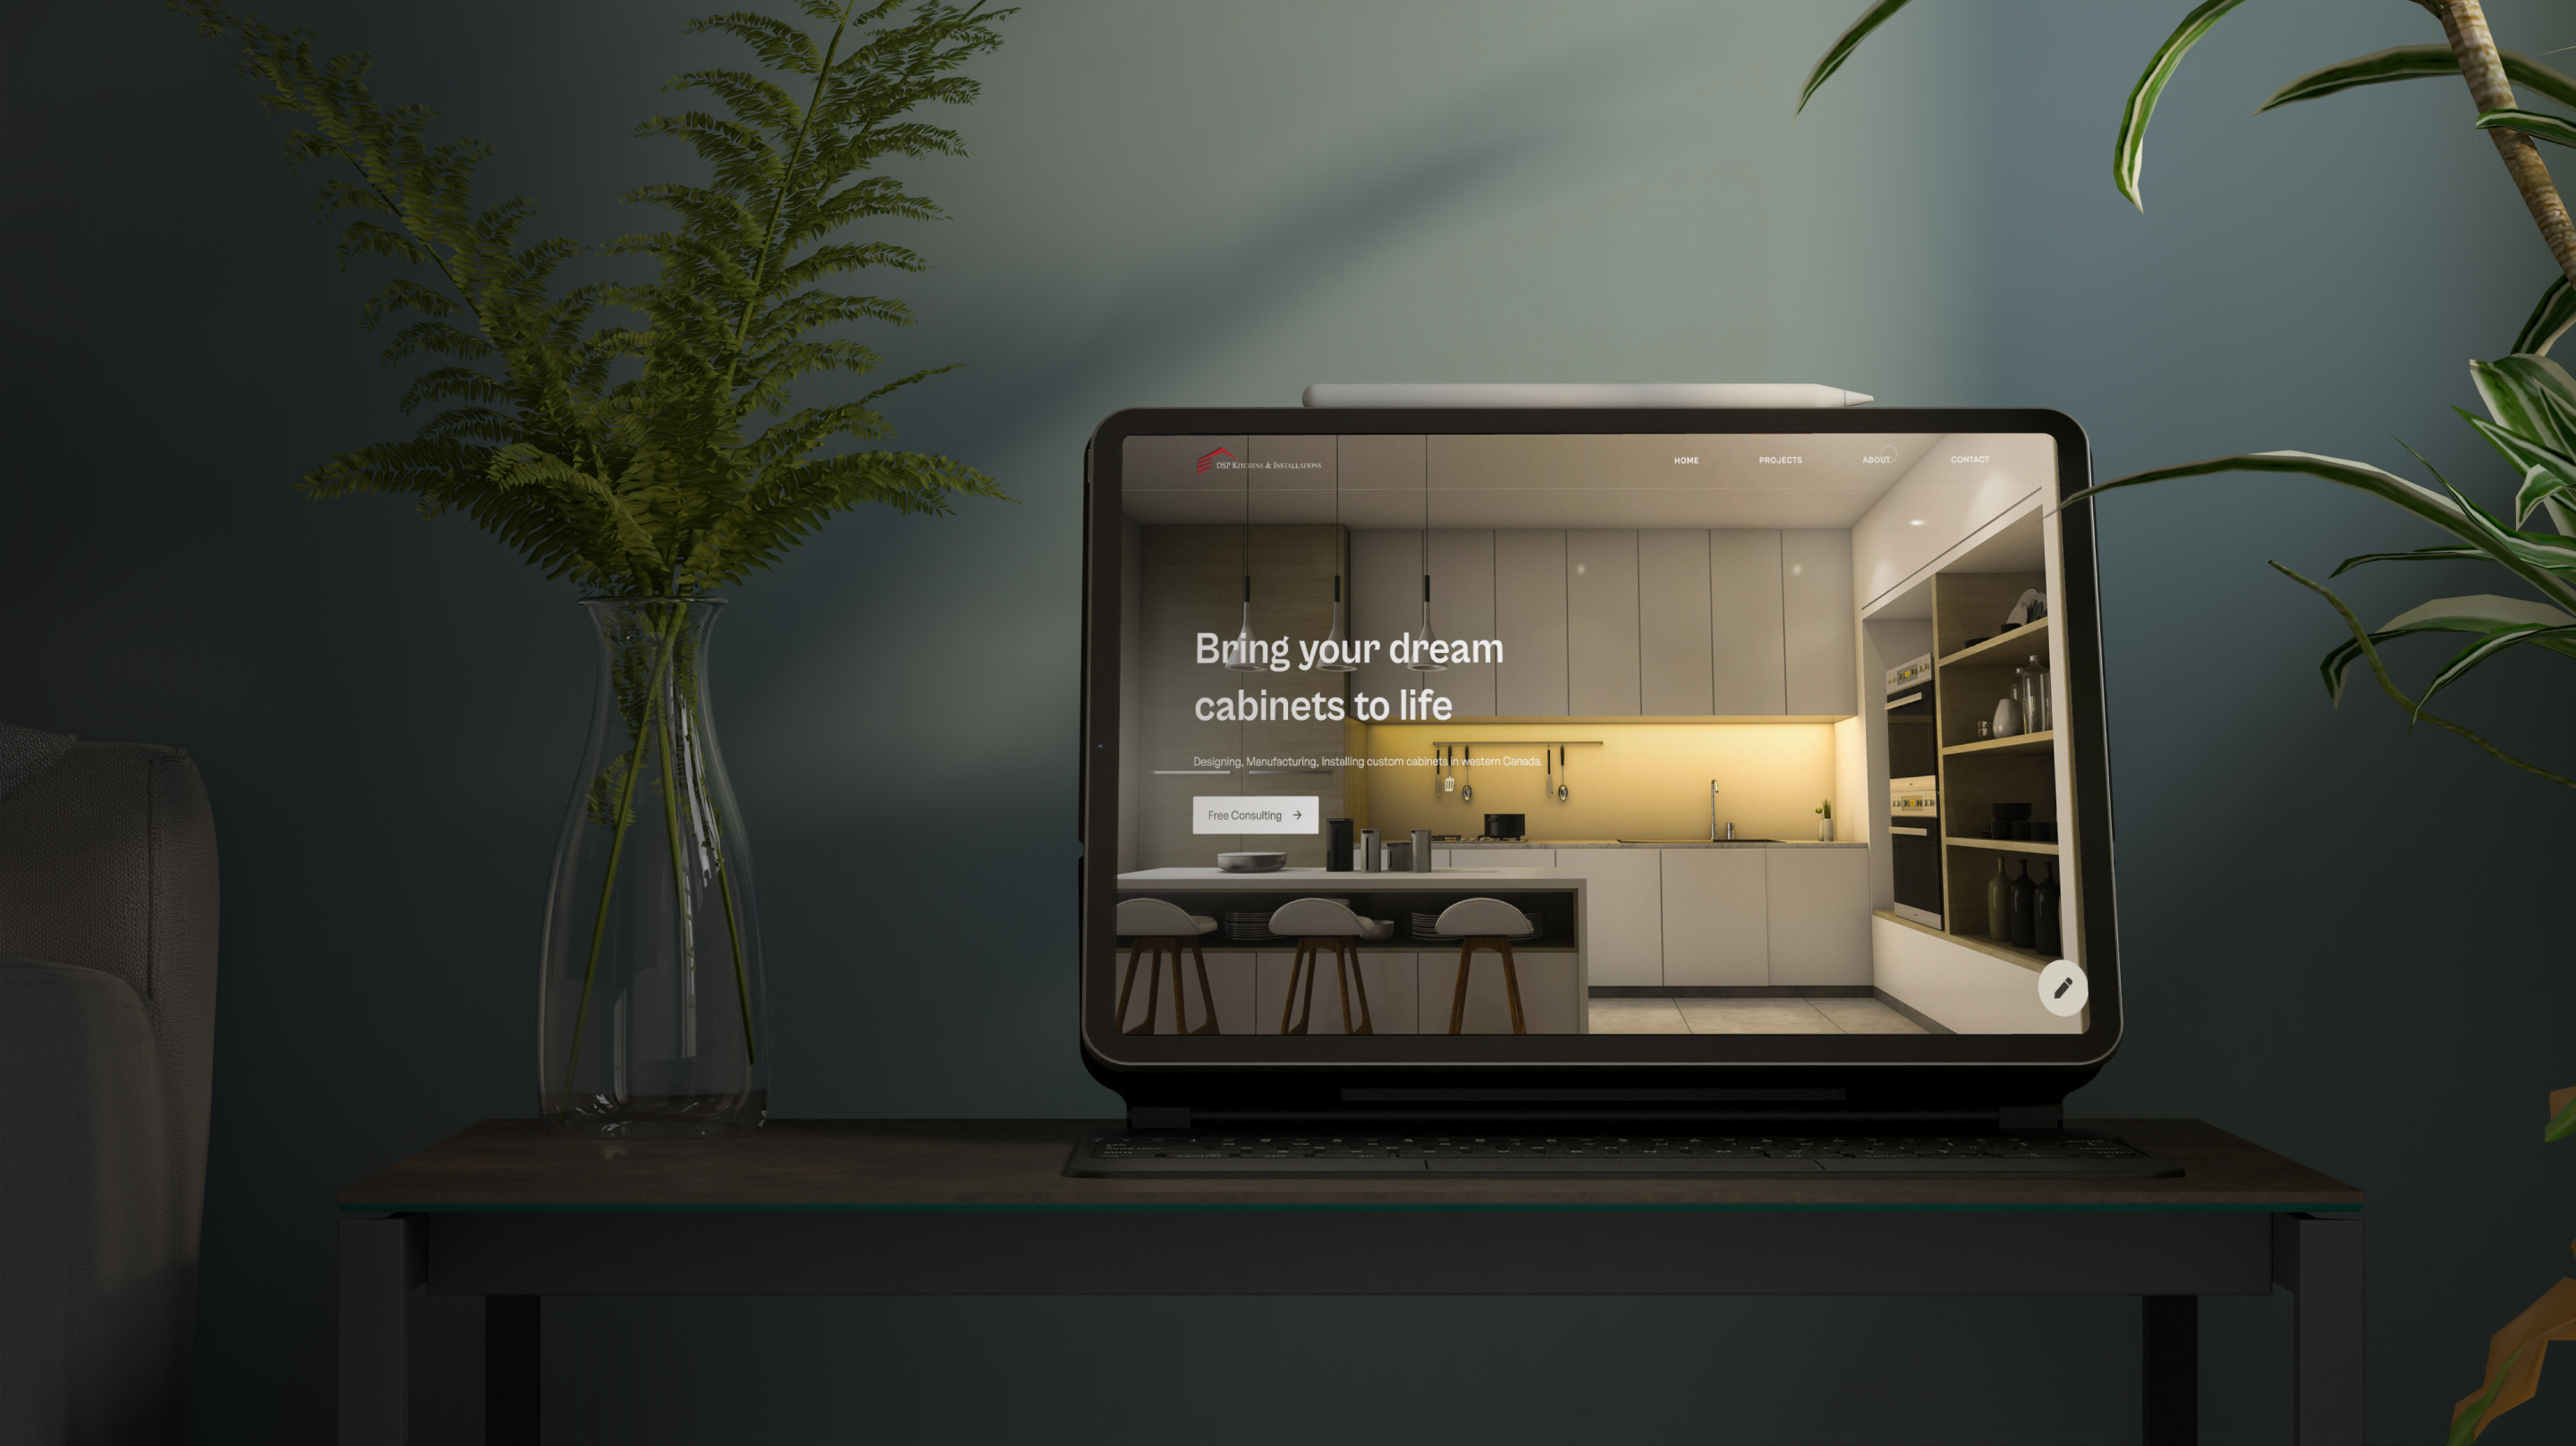 Mockup image for DSP Kitchen project